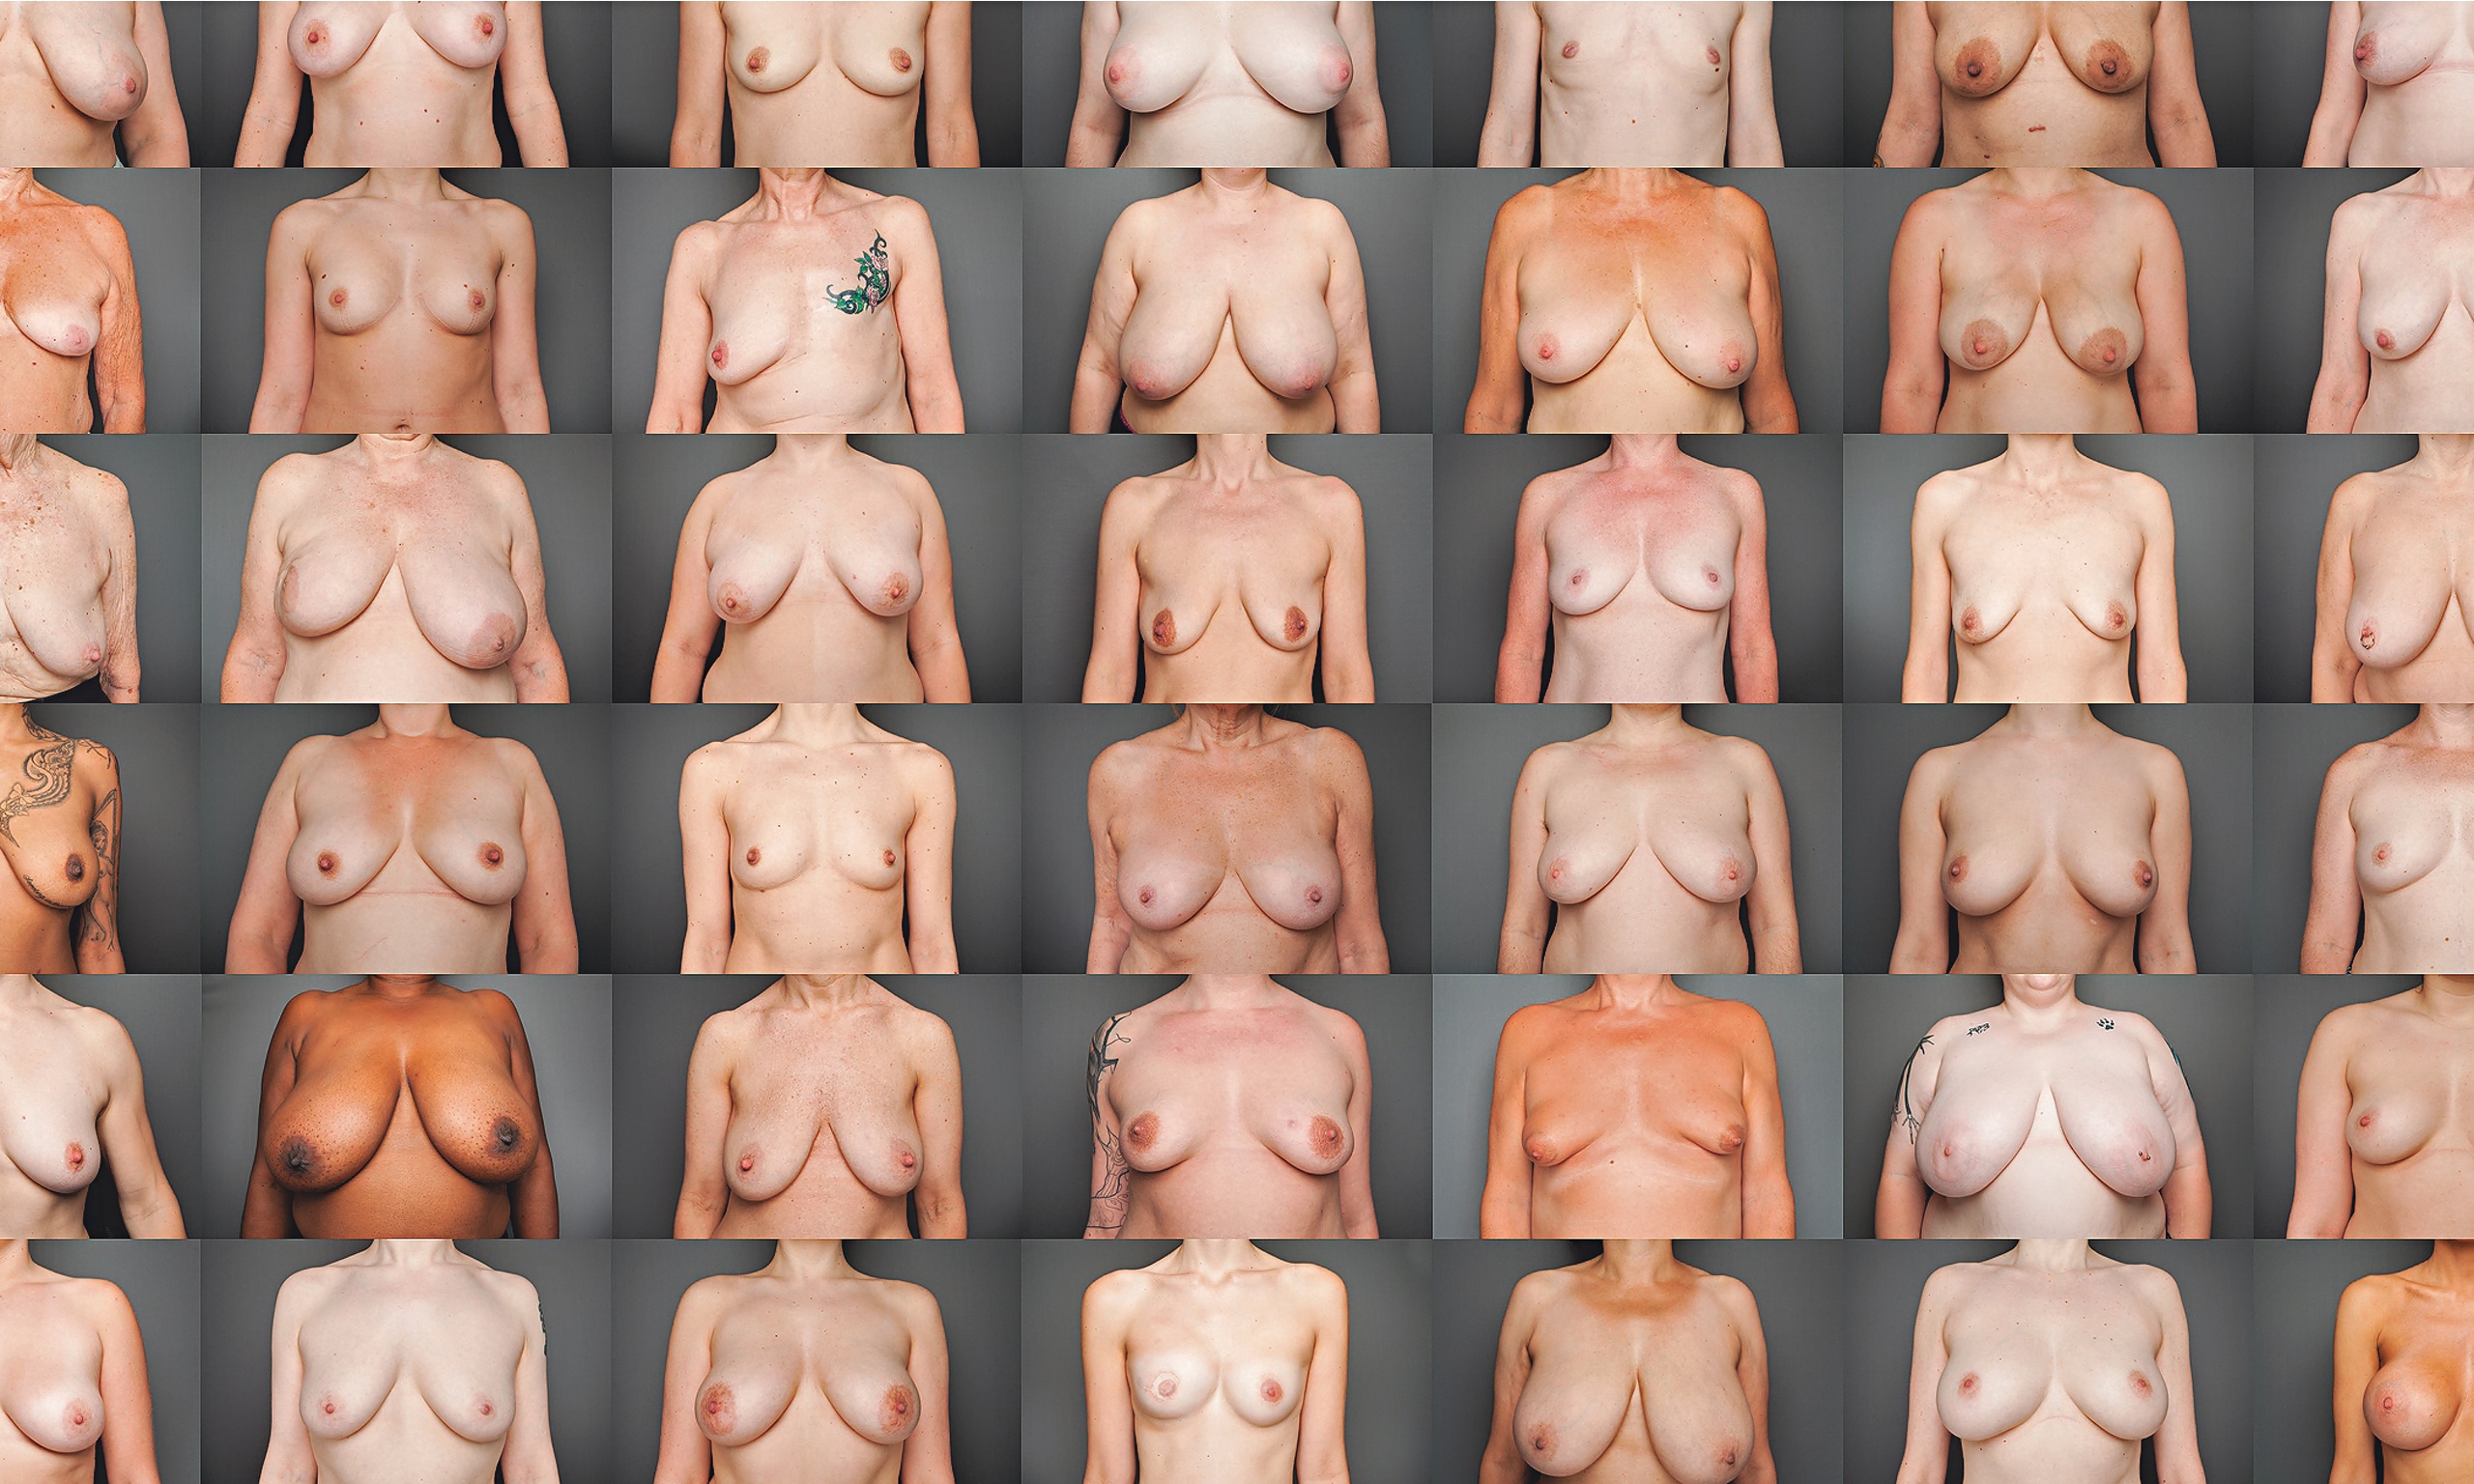 20 Types Of Boobs That Are All Beautiful In Their Own Way